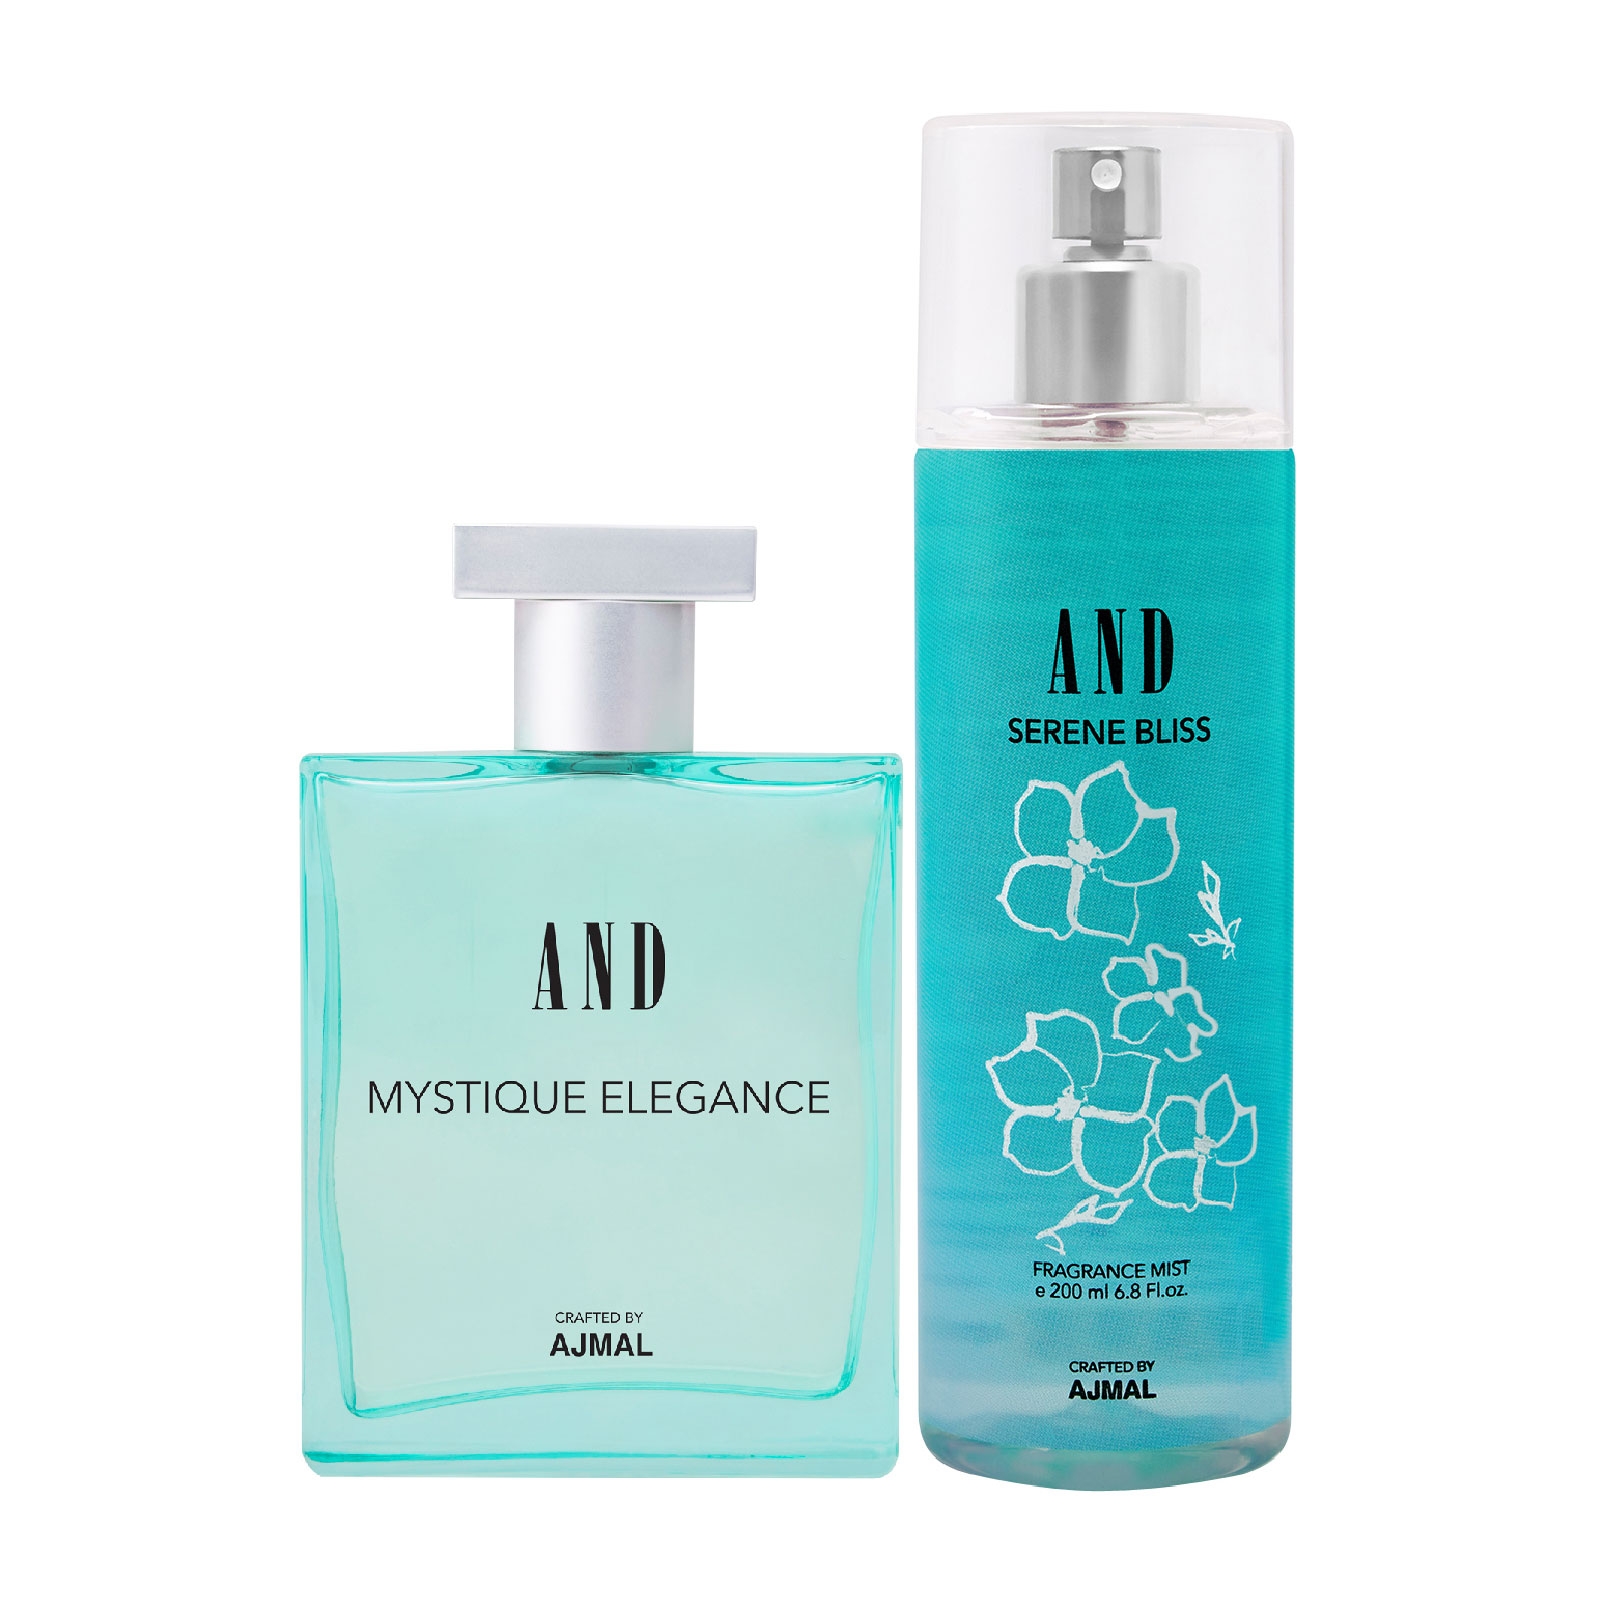 AND Crafted By Ajmal | AND Mystique Elegance EDP 100ML & Serene Bliss Body Mist 200ML Pack of 2 for Women Crafted by Ajmal + 2 Parfum Testers